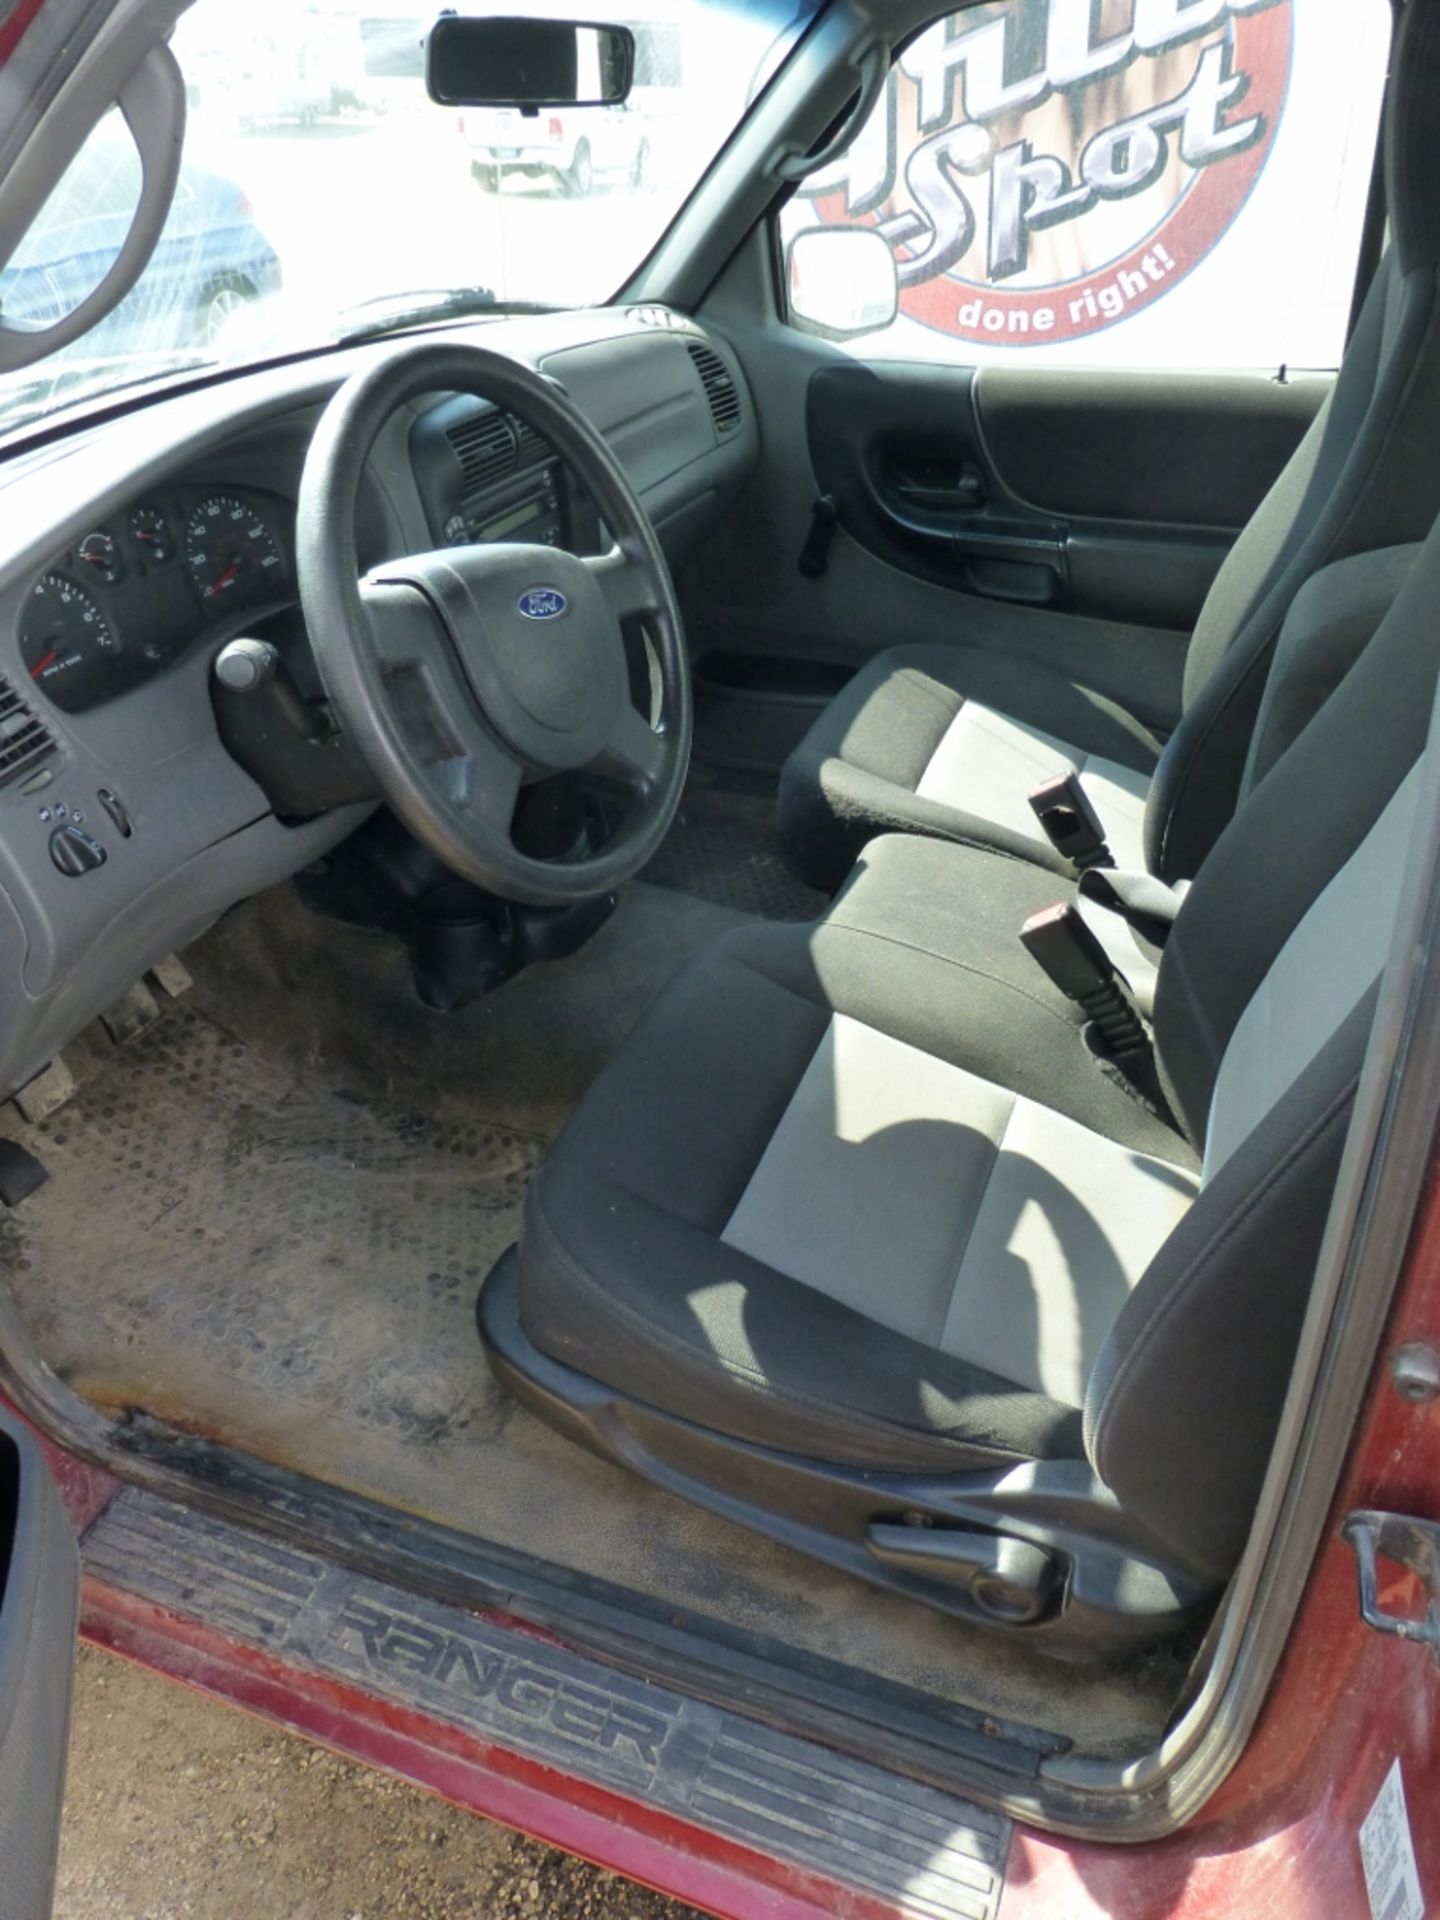 2004 Ford Ranger Ext . Cab - Image 4 of 17